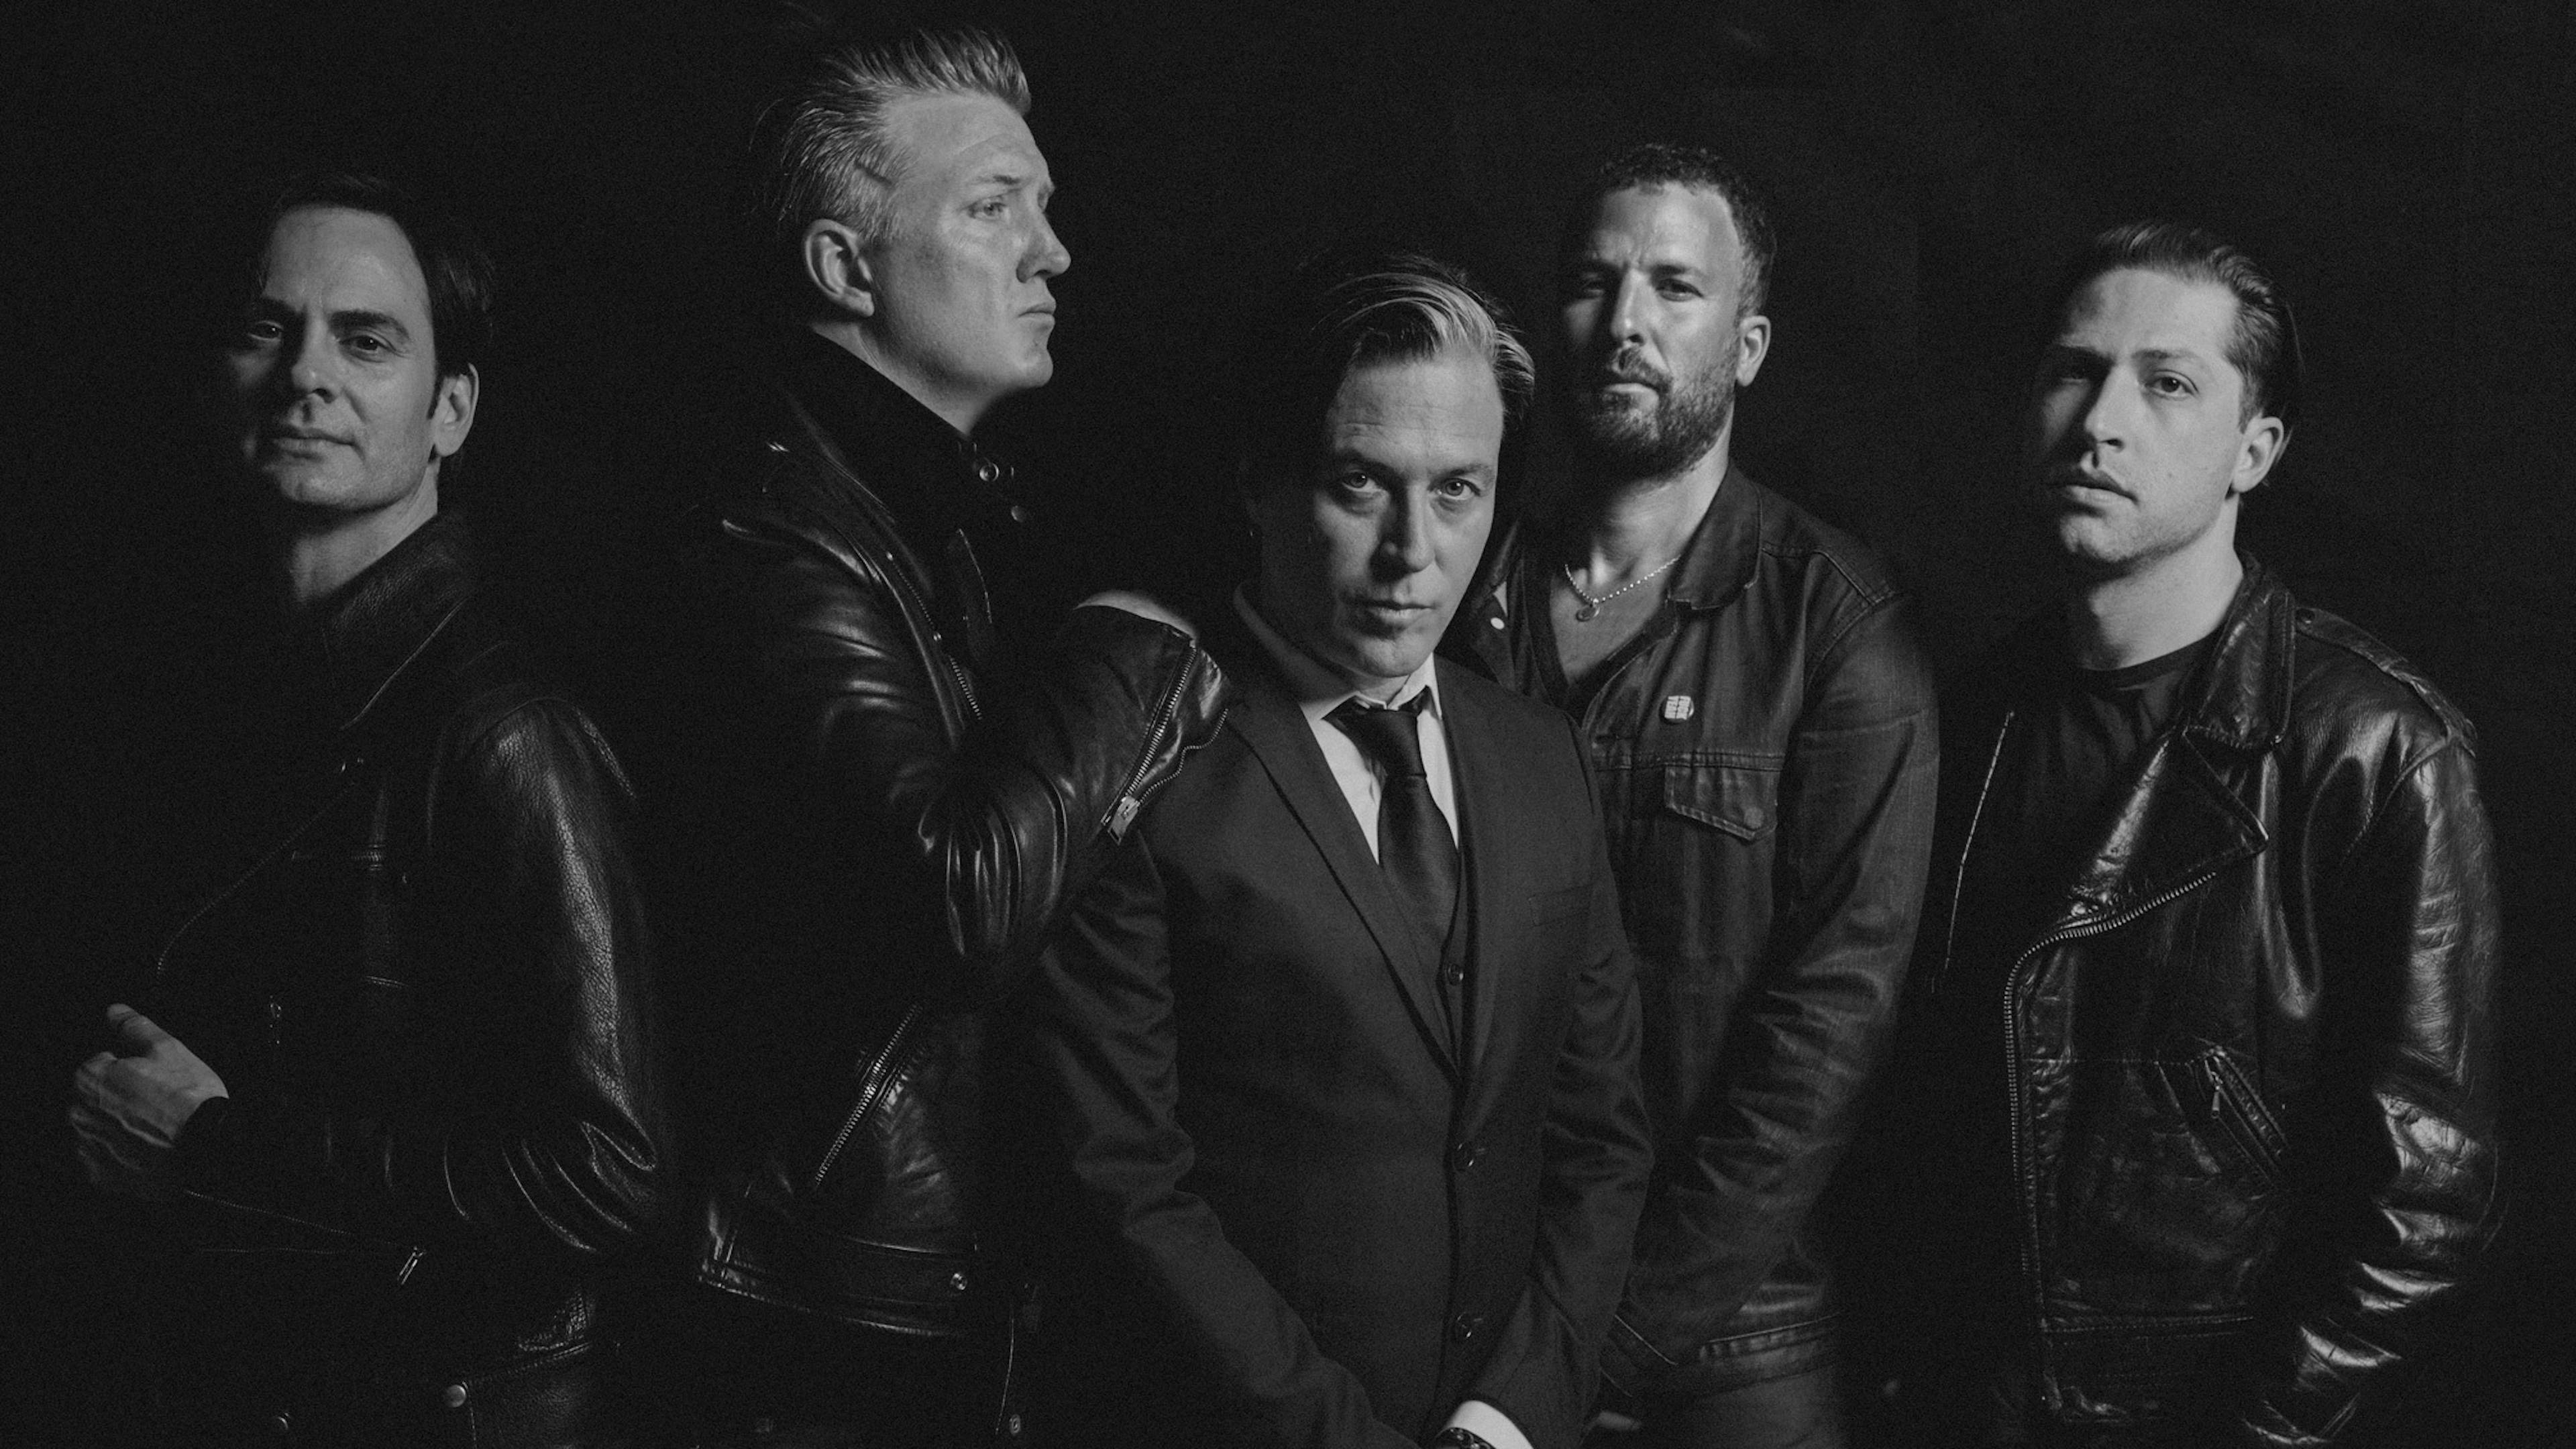 Queens Of The Stone Age to reissue three albums on vinyl – including their 1998 debut